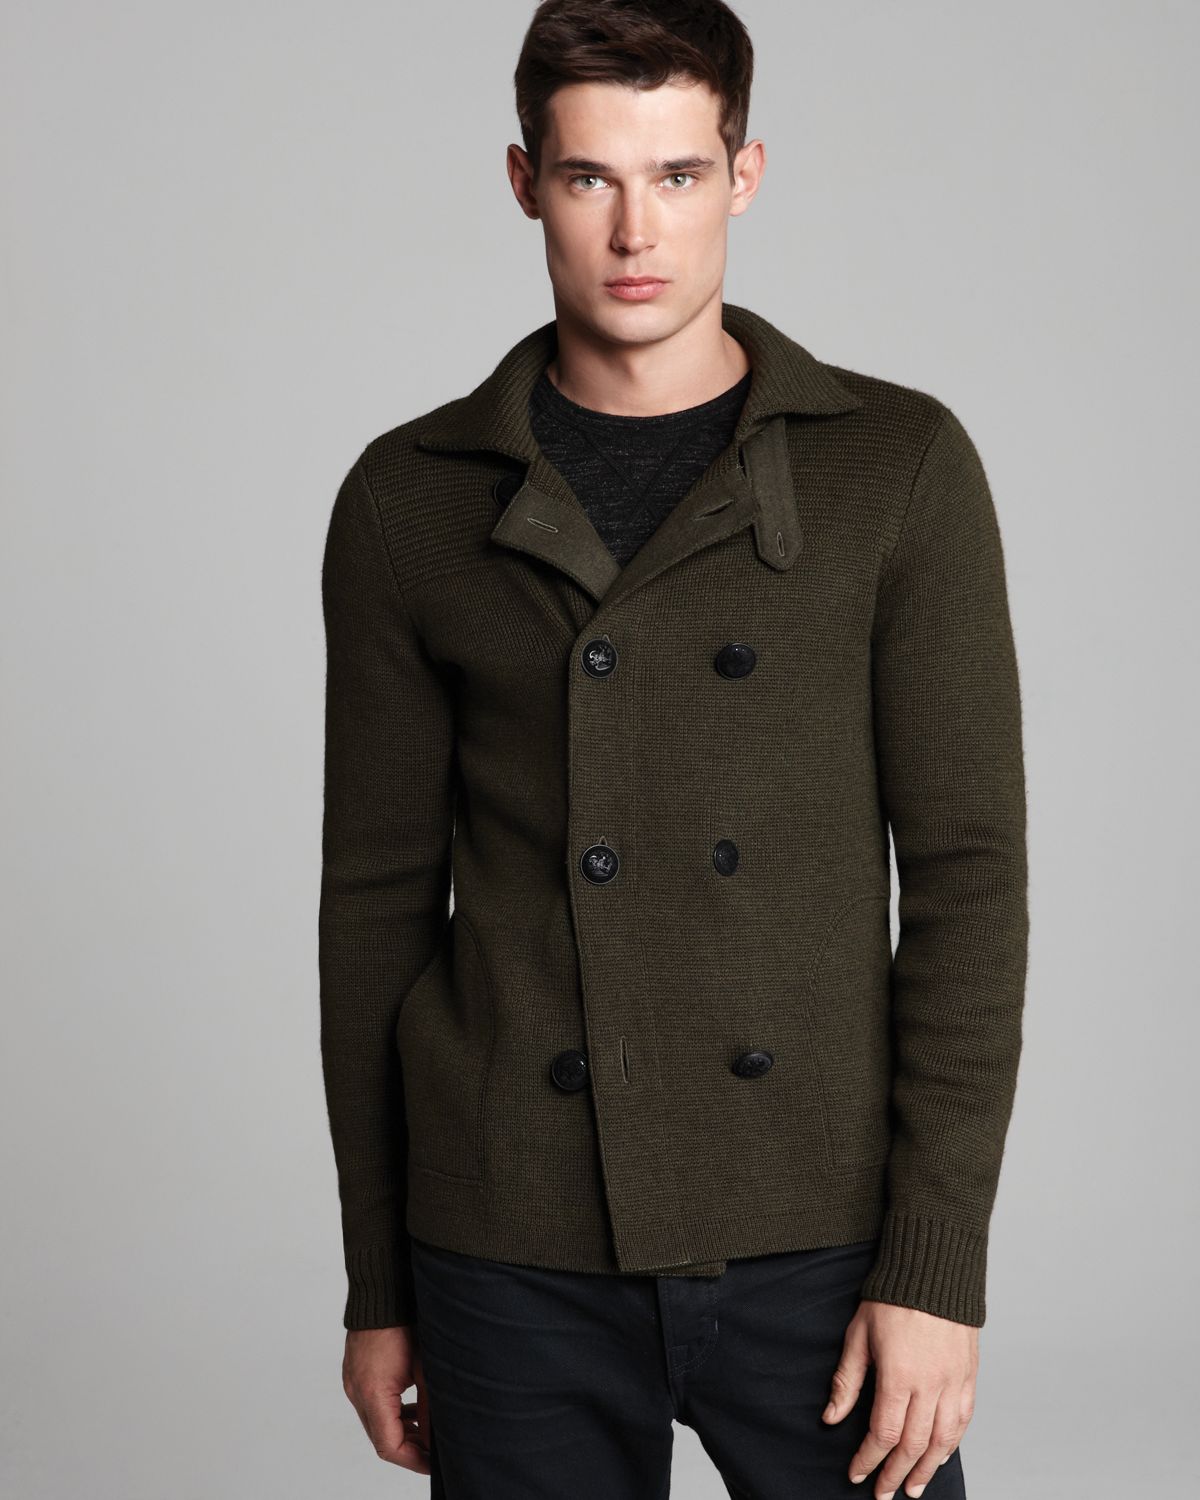 Vince Doublebreasted Peacoat Sweater in Natural for Men | Lyst